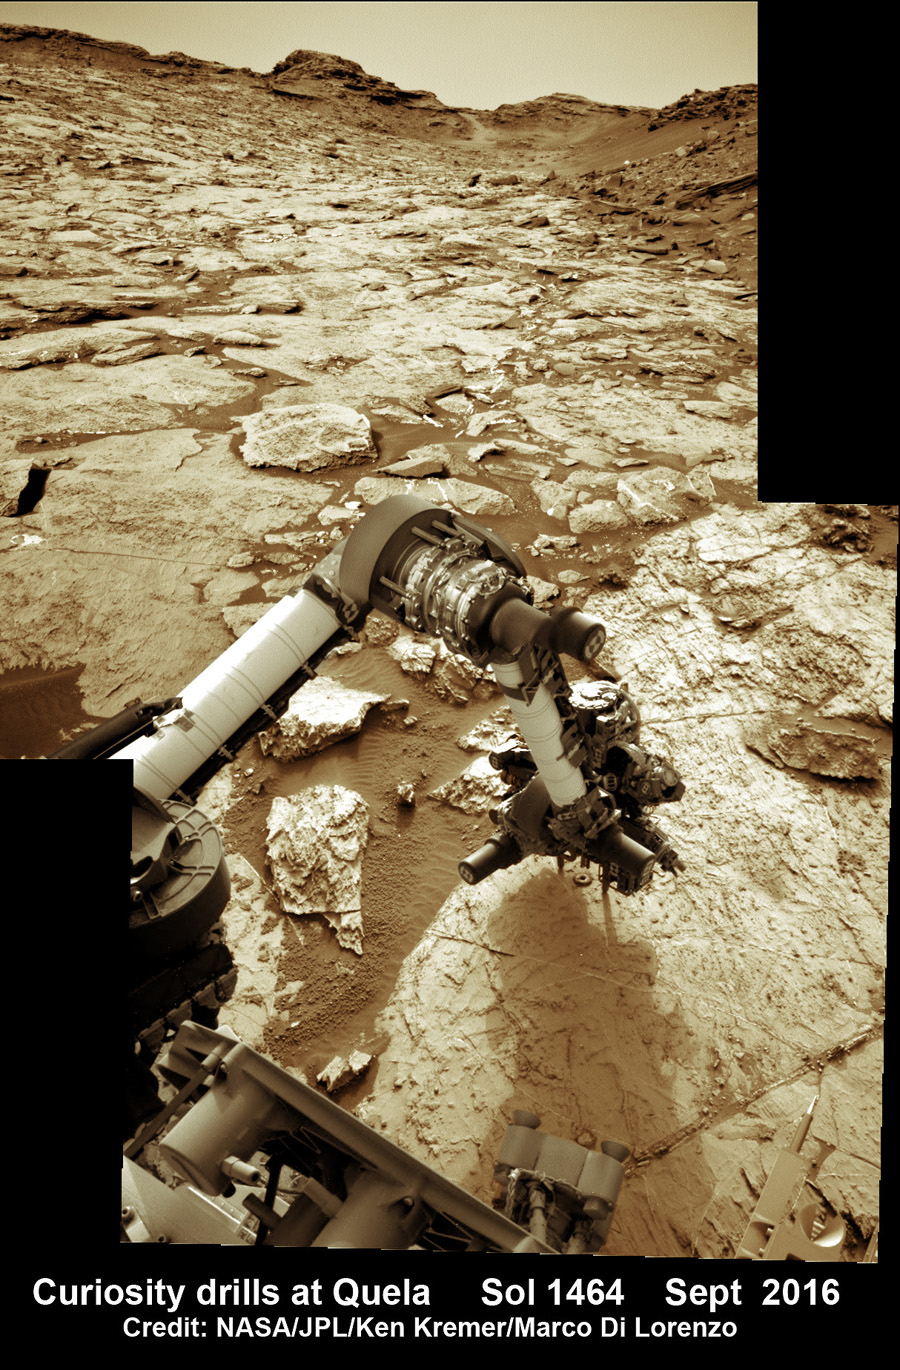 Curiosity drills into Quela rock target in the Murray Buttes region on Sol 1464, Sept. 18, 2016, in this navcam camera mosaic, stitched from raw images and colorized.  Credit: NASA/JPL/Ken Kremer/kenkremer.com/Marco Di Lorenzo